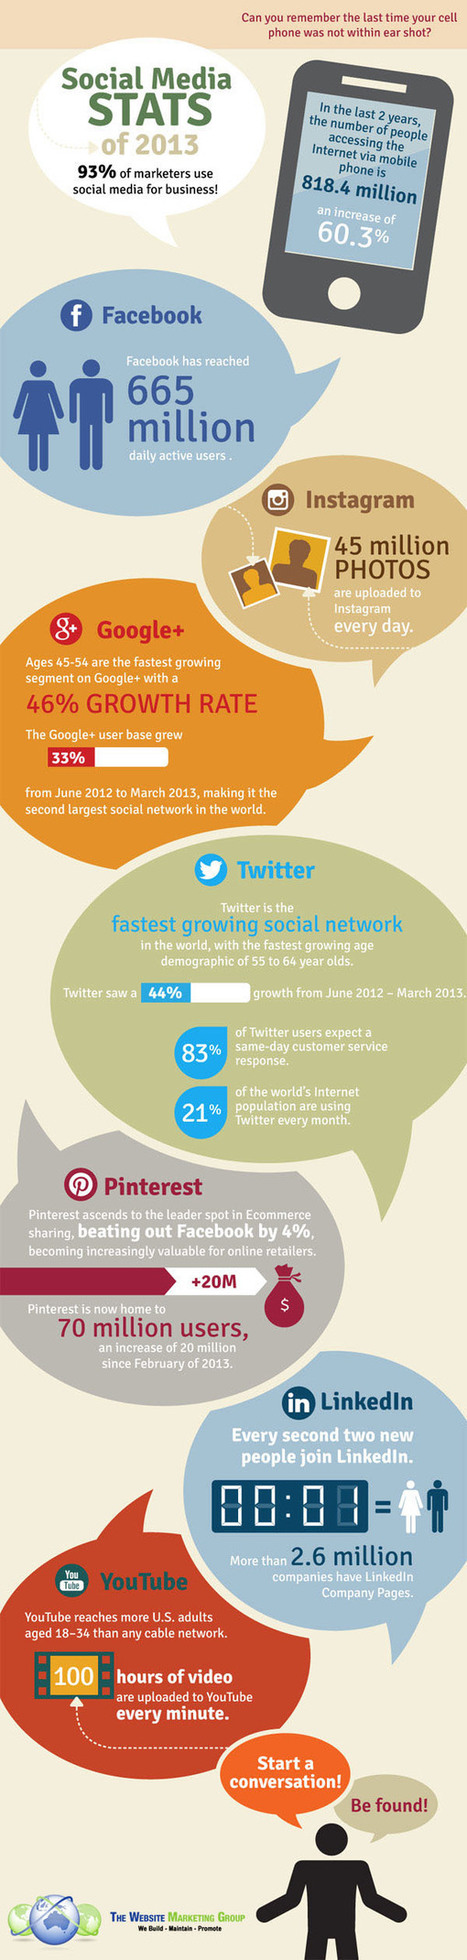 Social Media Infographic 2013 : Which platform is growing the fastest? | Education 2.0 & 3.0 | Scoop.it